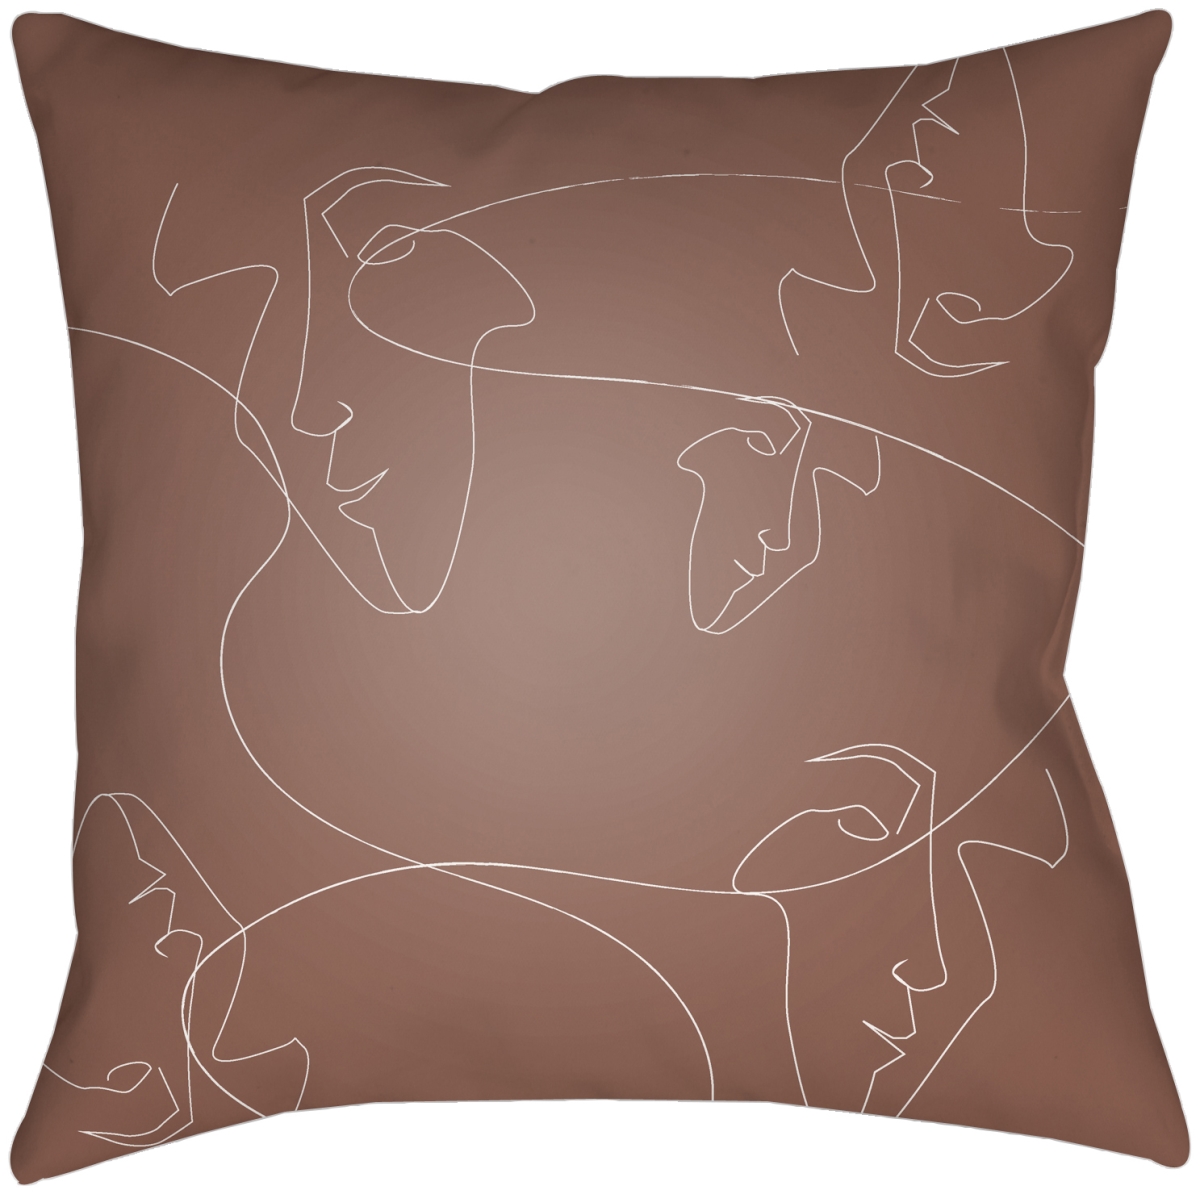 MDF002-1616 16 x 16 in. Modern Faces Accent Square Pillow, Medium Brown & White -  Surya